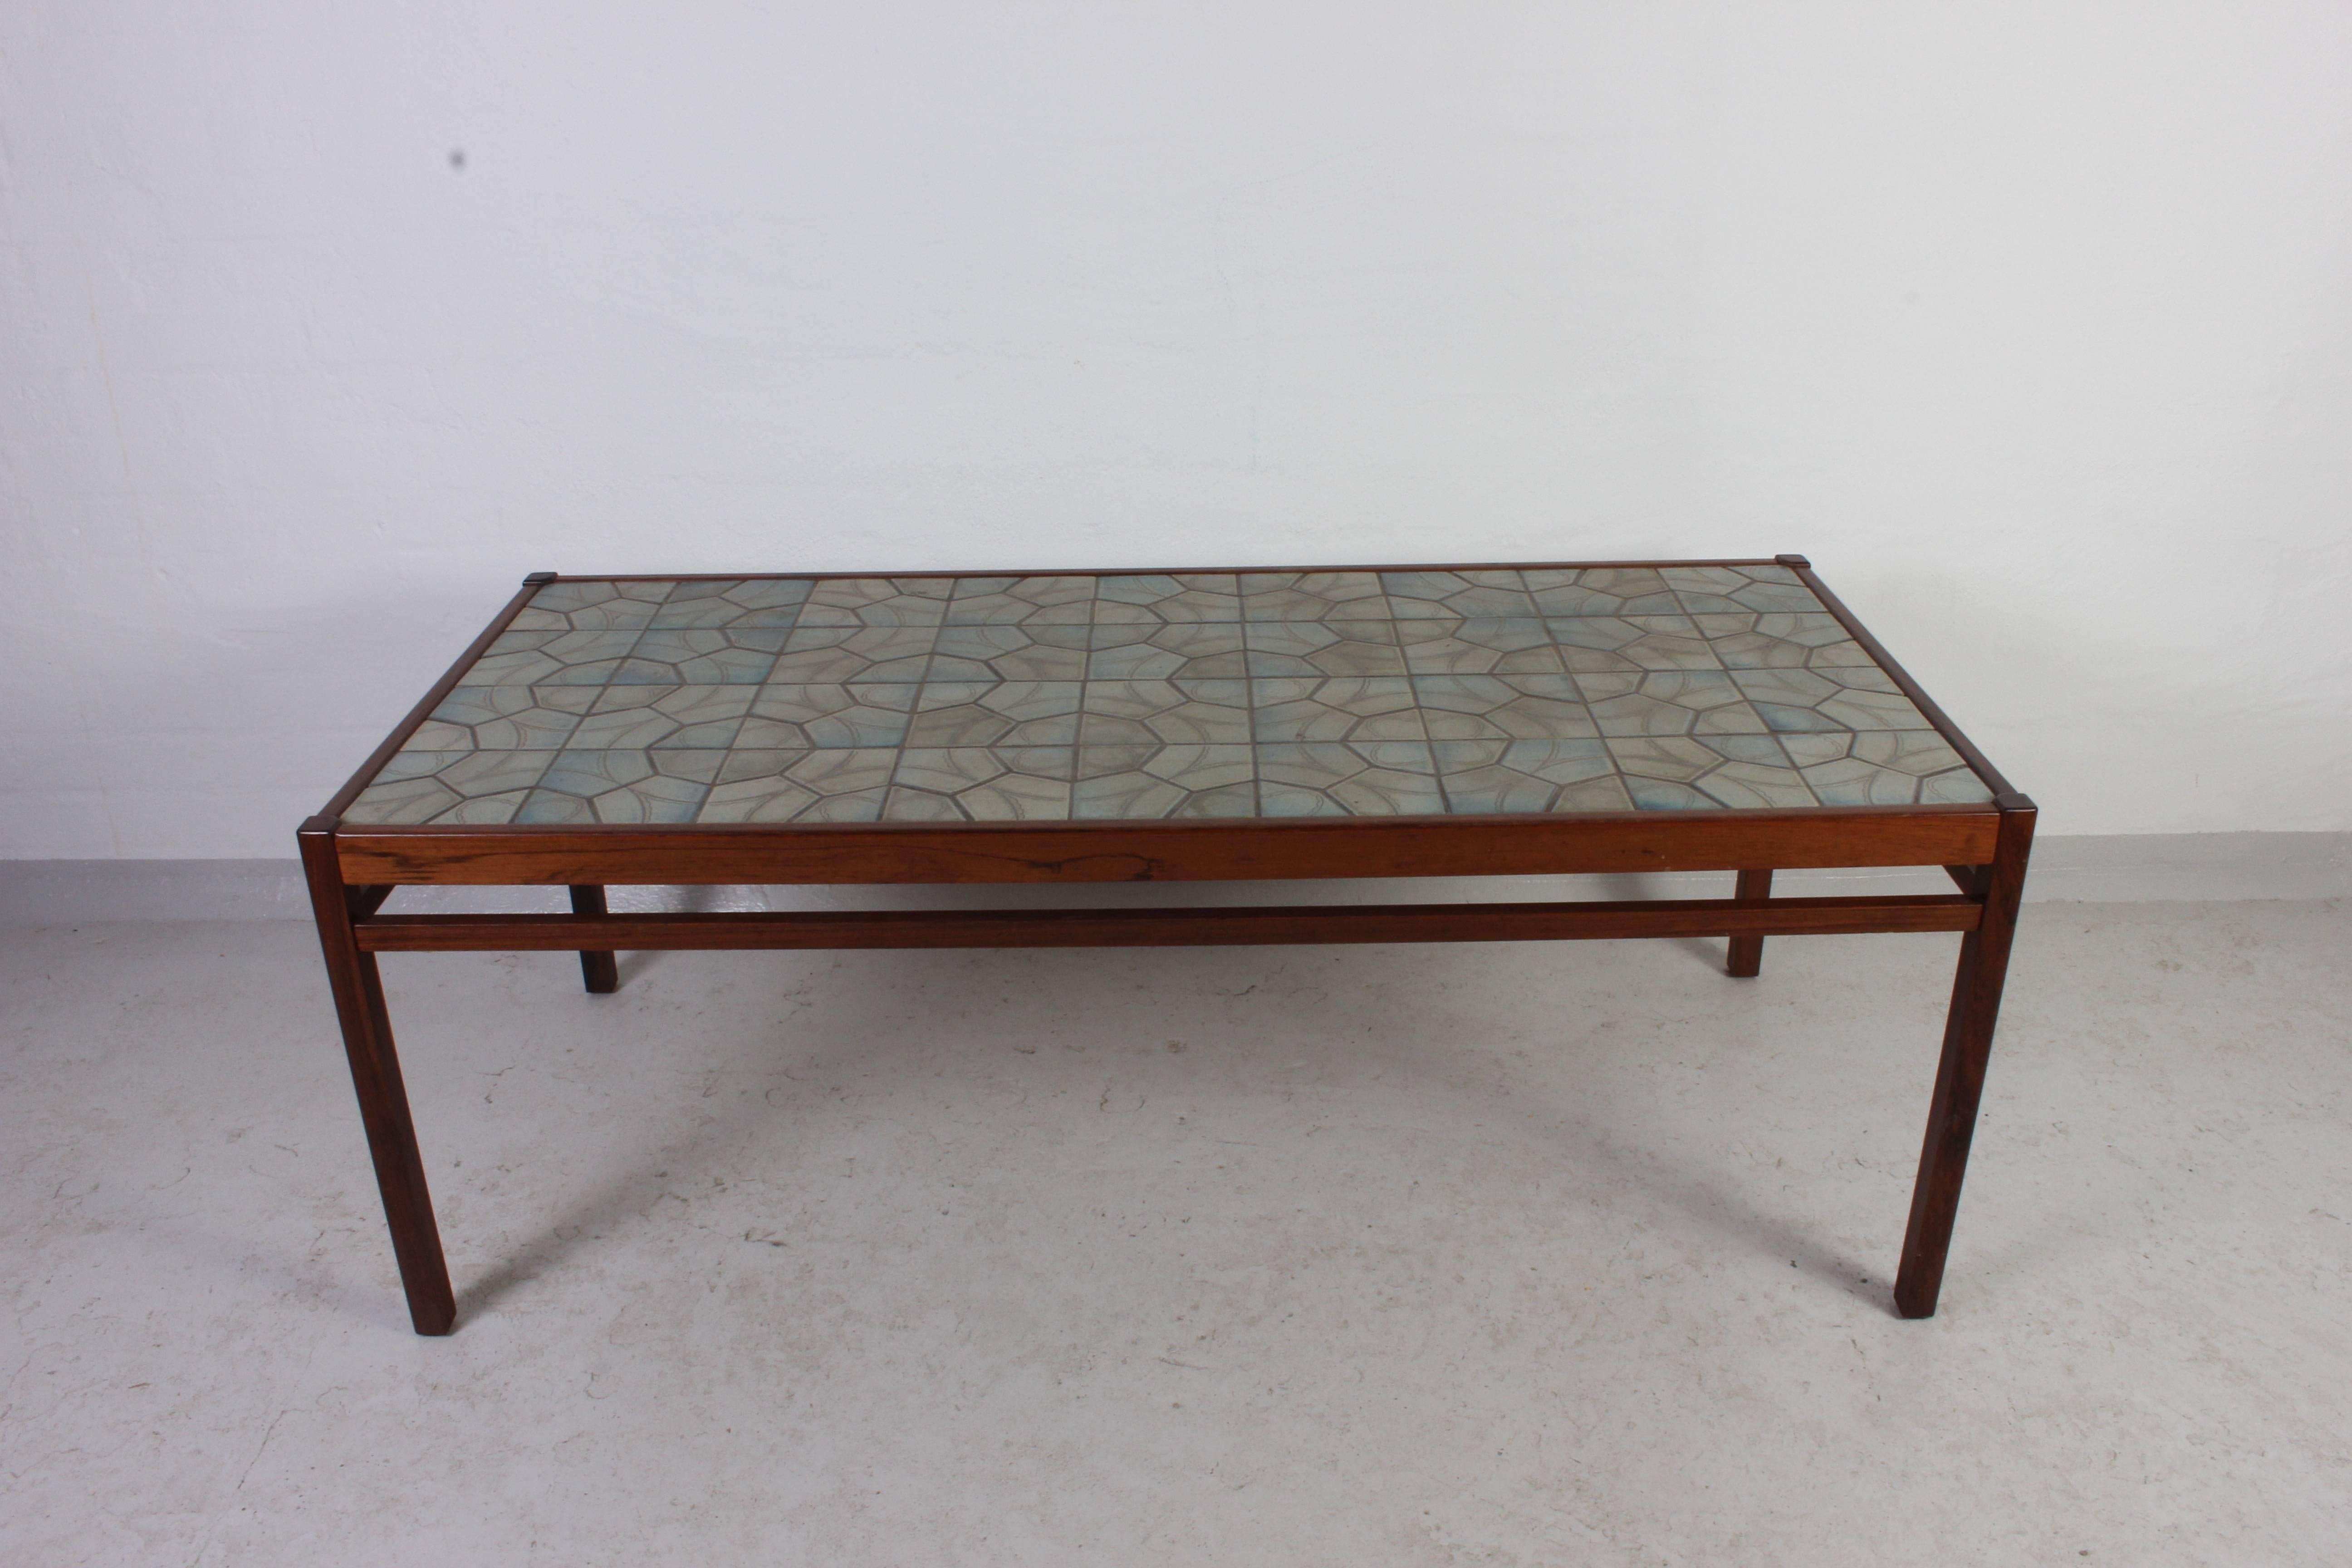 Midcentury Danish coffee table with ceramic tile top. This table is in very good vintage condition.